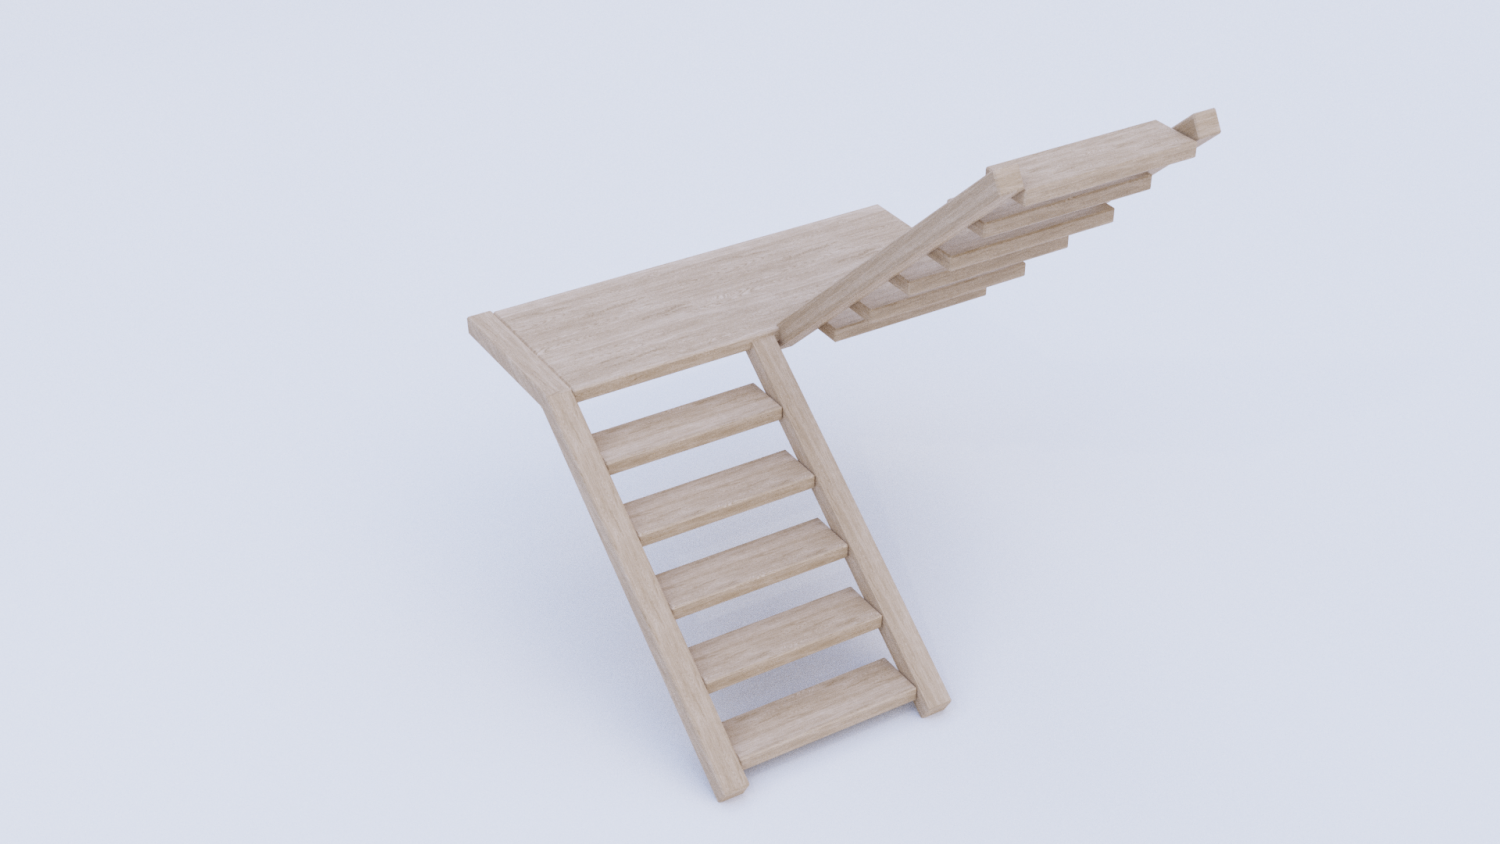 Wooden Stairs Low Poly 3d Model In Stair 3dexport